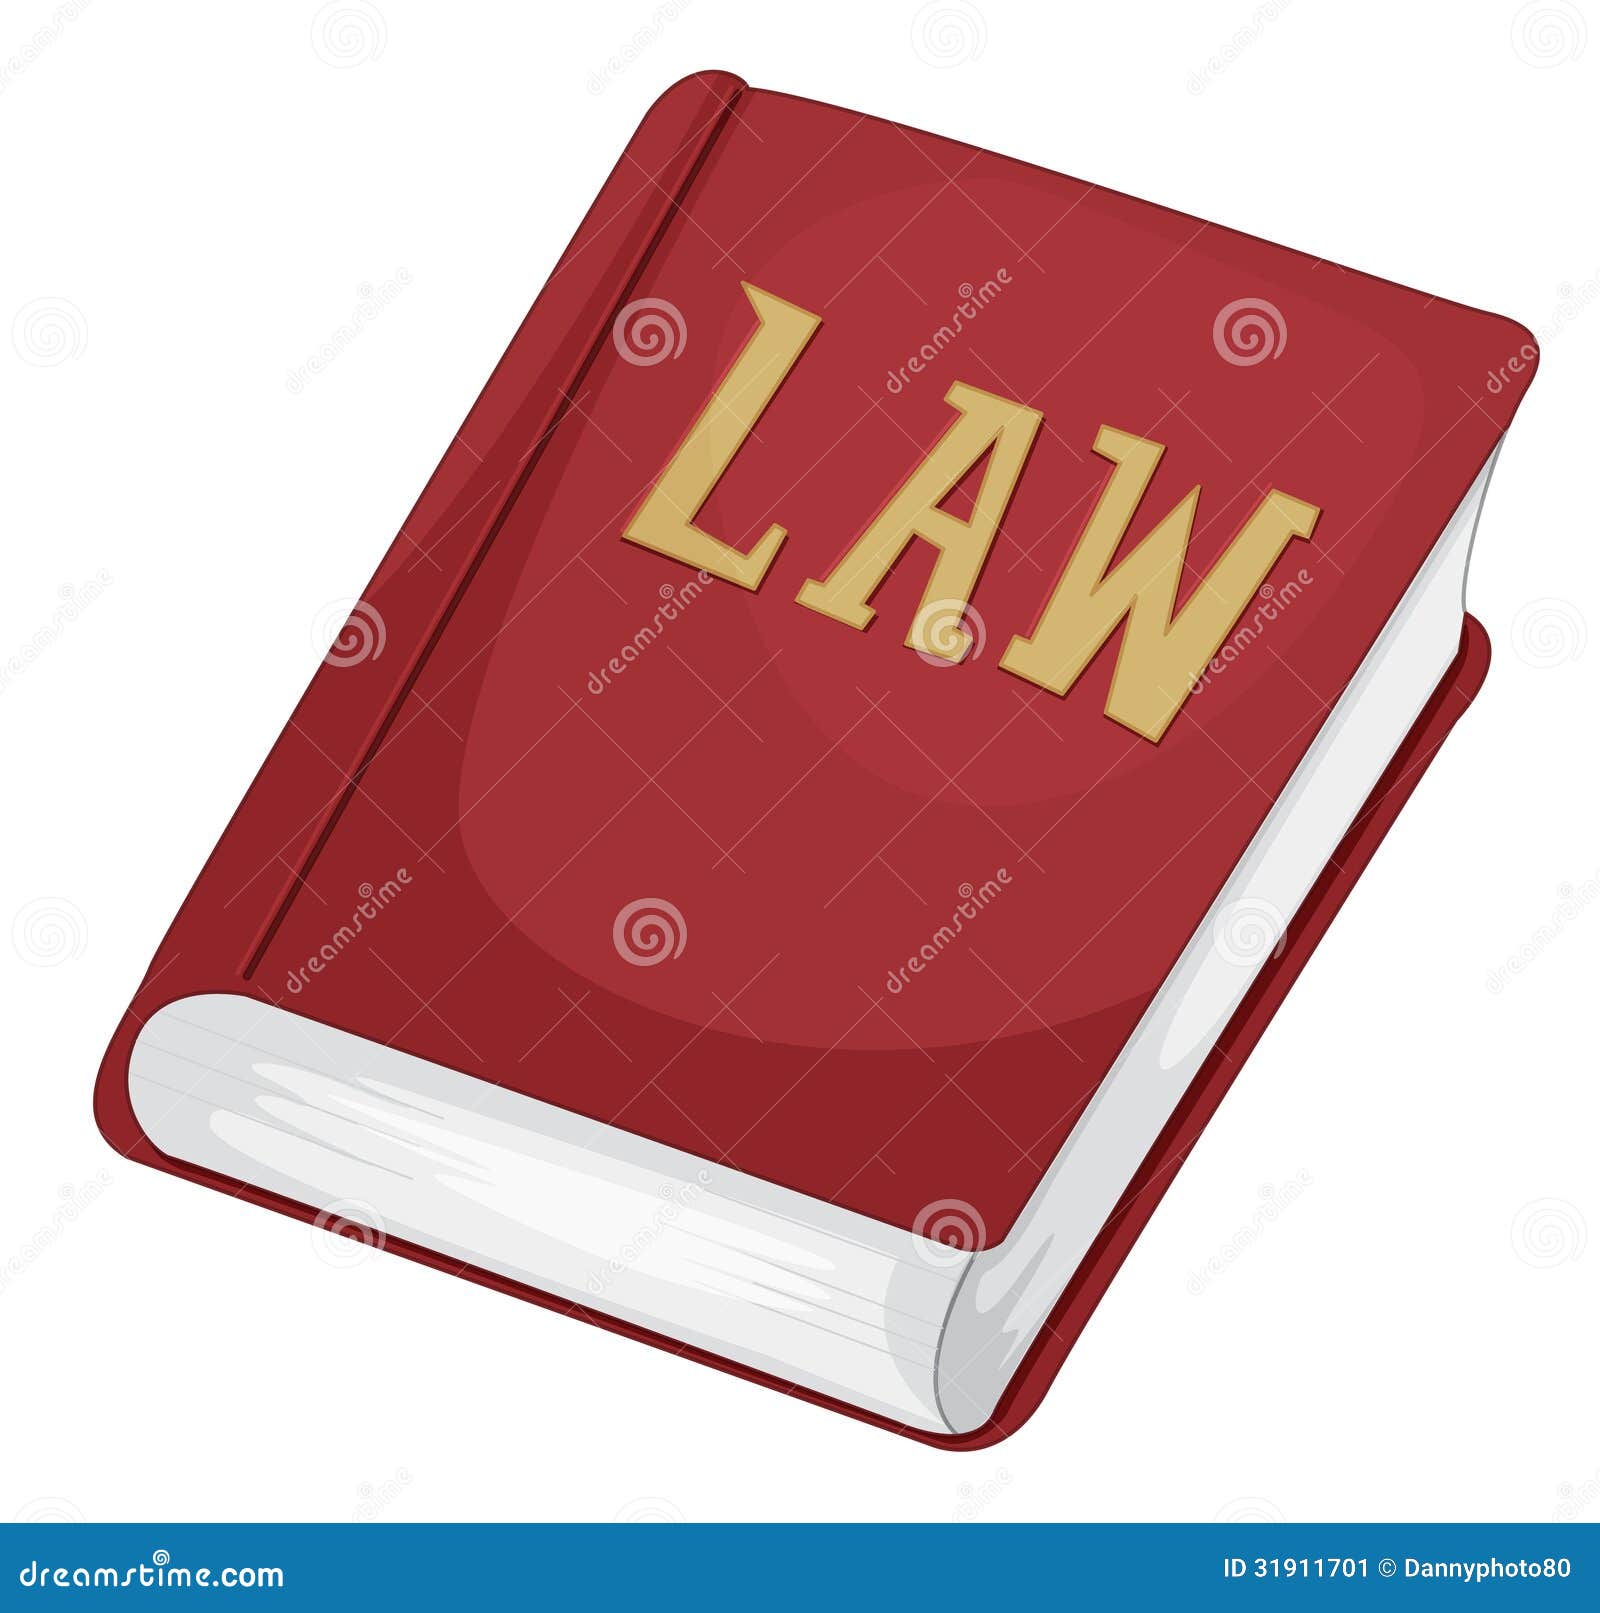 Law Book Stock Image - Image: 31911701